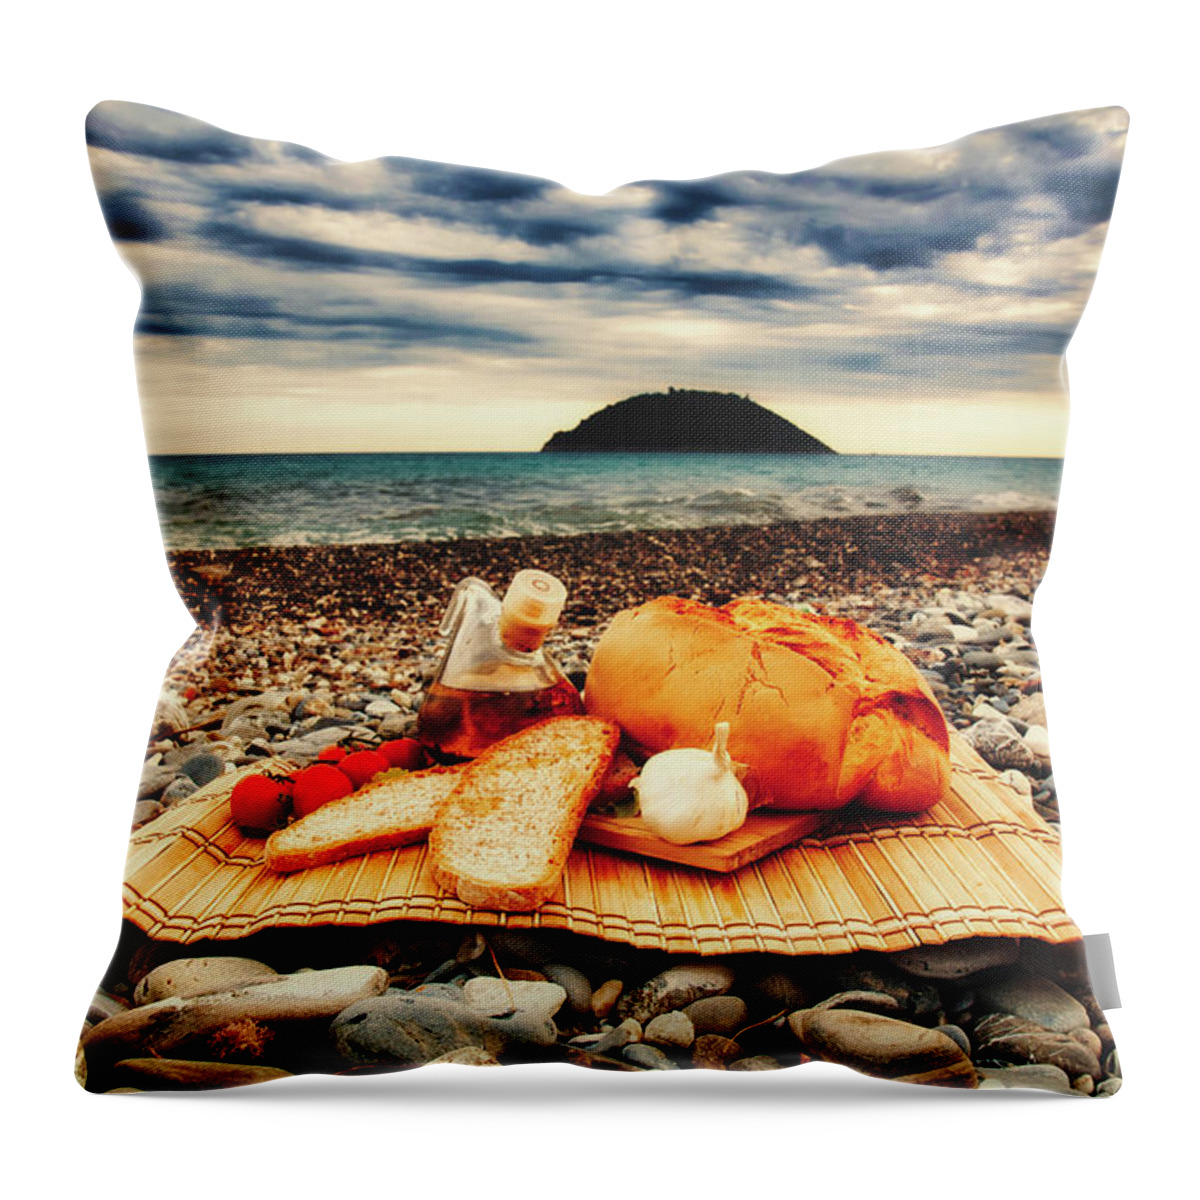 Rocks Throw Pillow featuring the photograph Seaside Picnic by Mountain Dreams